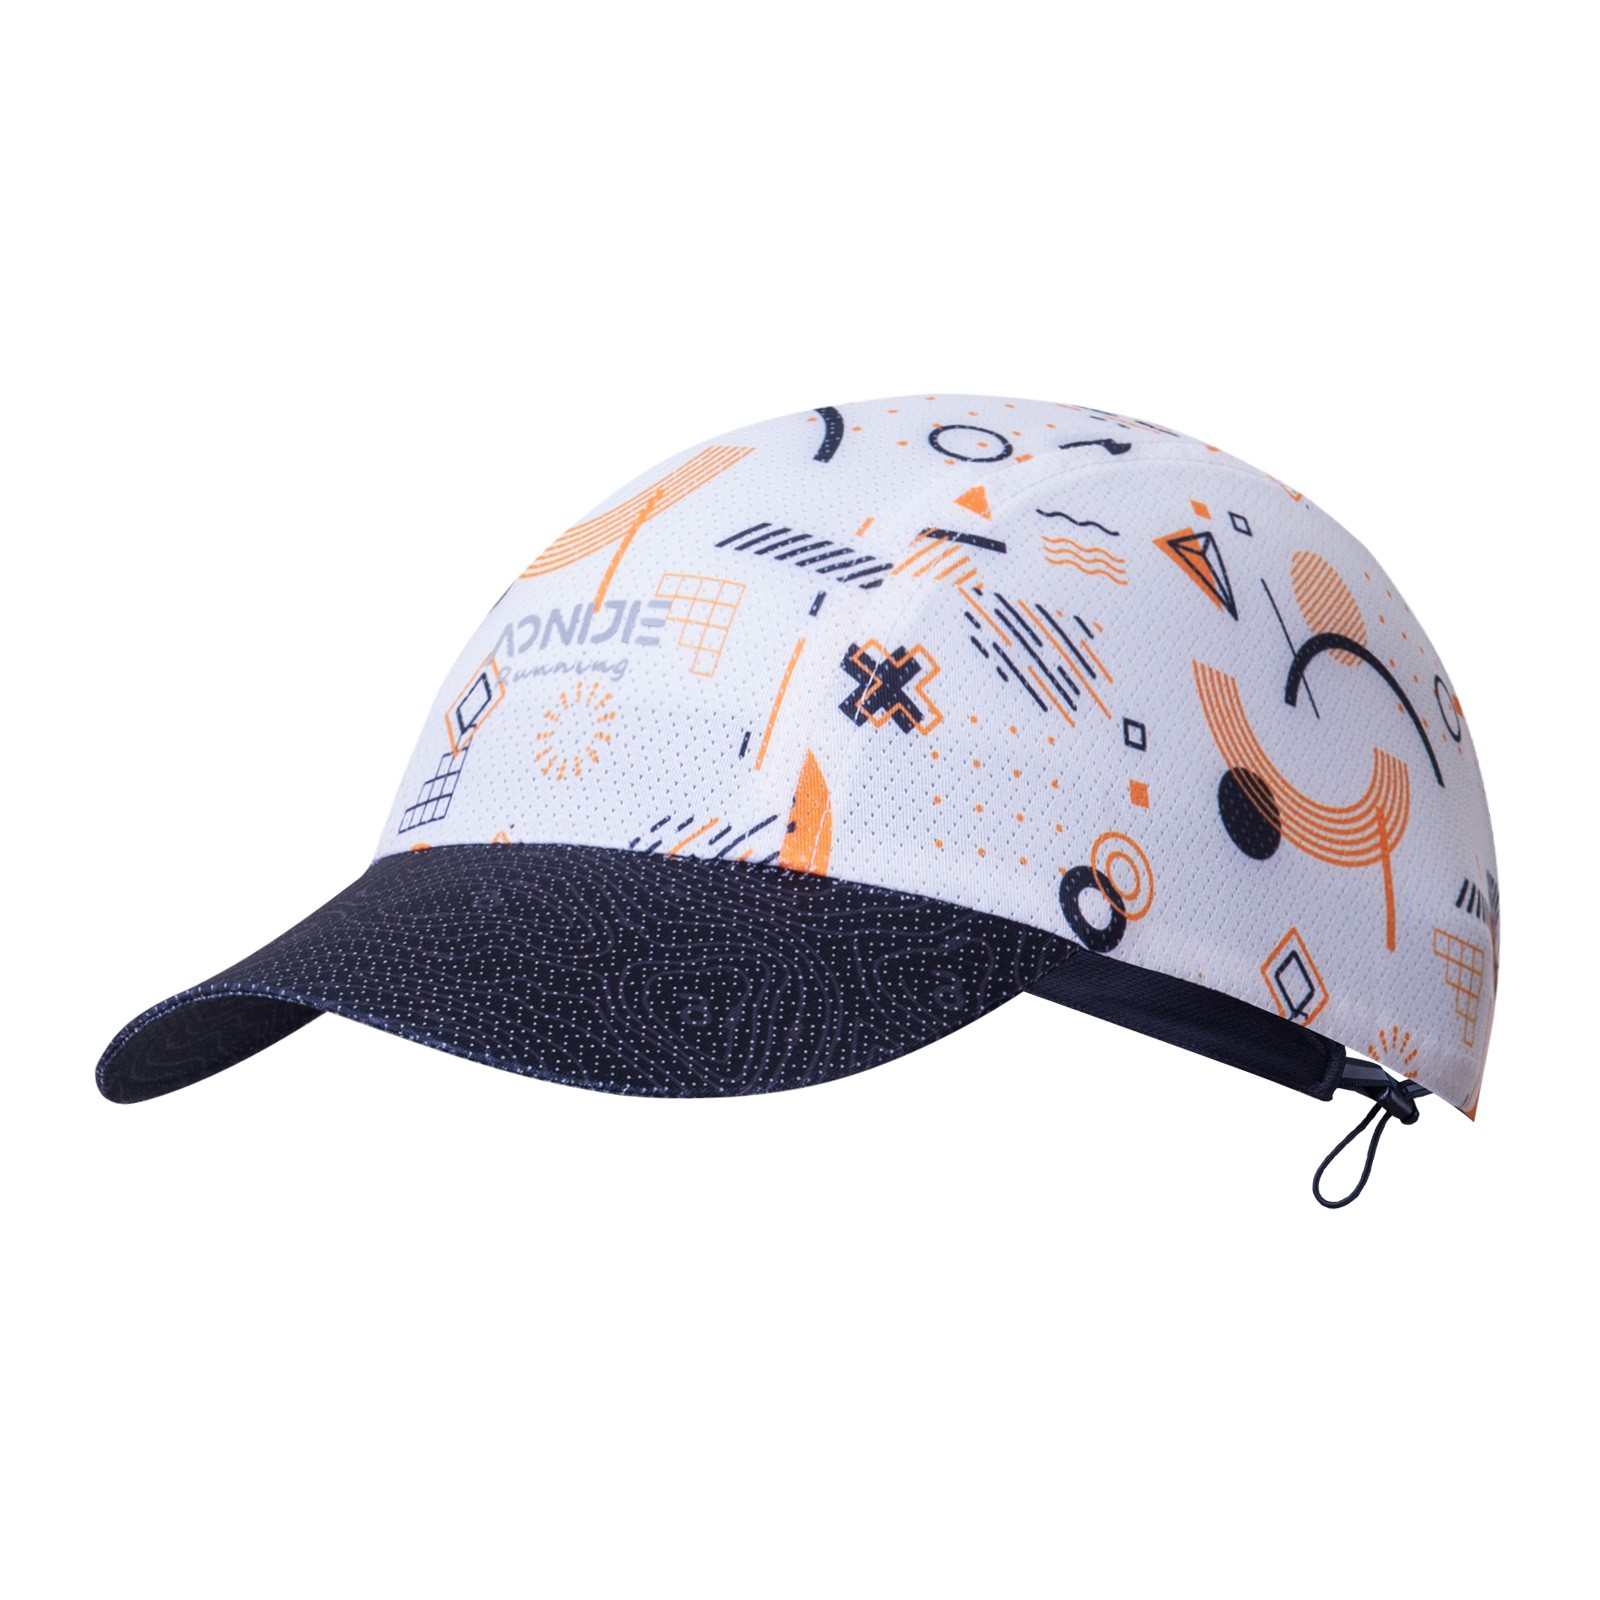 AONIJIE E4607 Cartoon Style Soft Foldable Baseball Hat Spring Summer Running Sunscreen Hat Multi-color Protection Brim Sport Cap